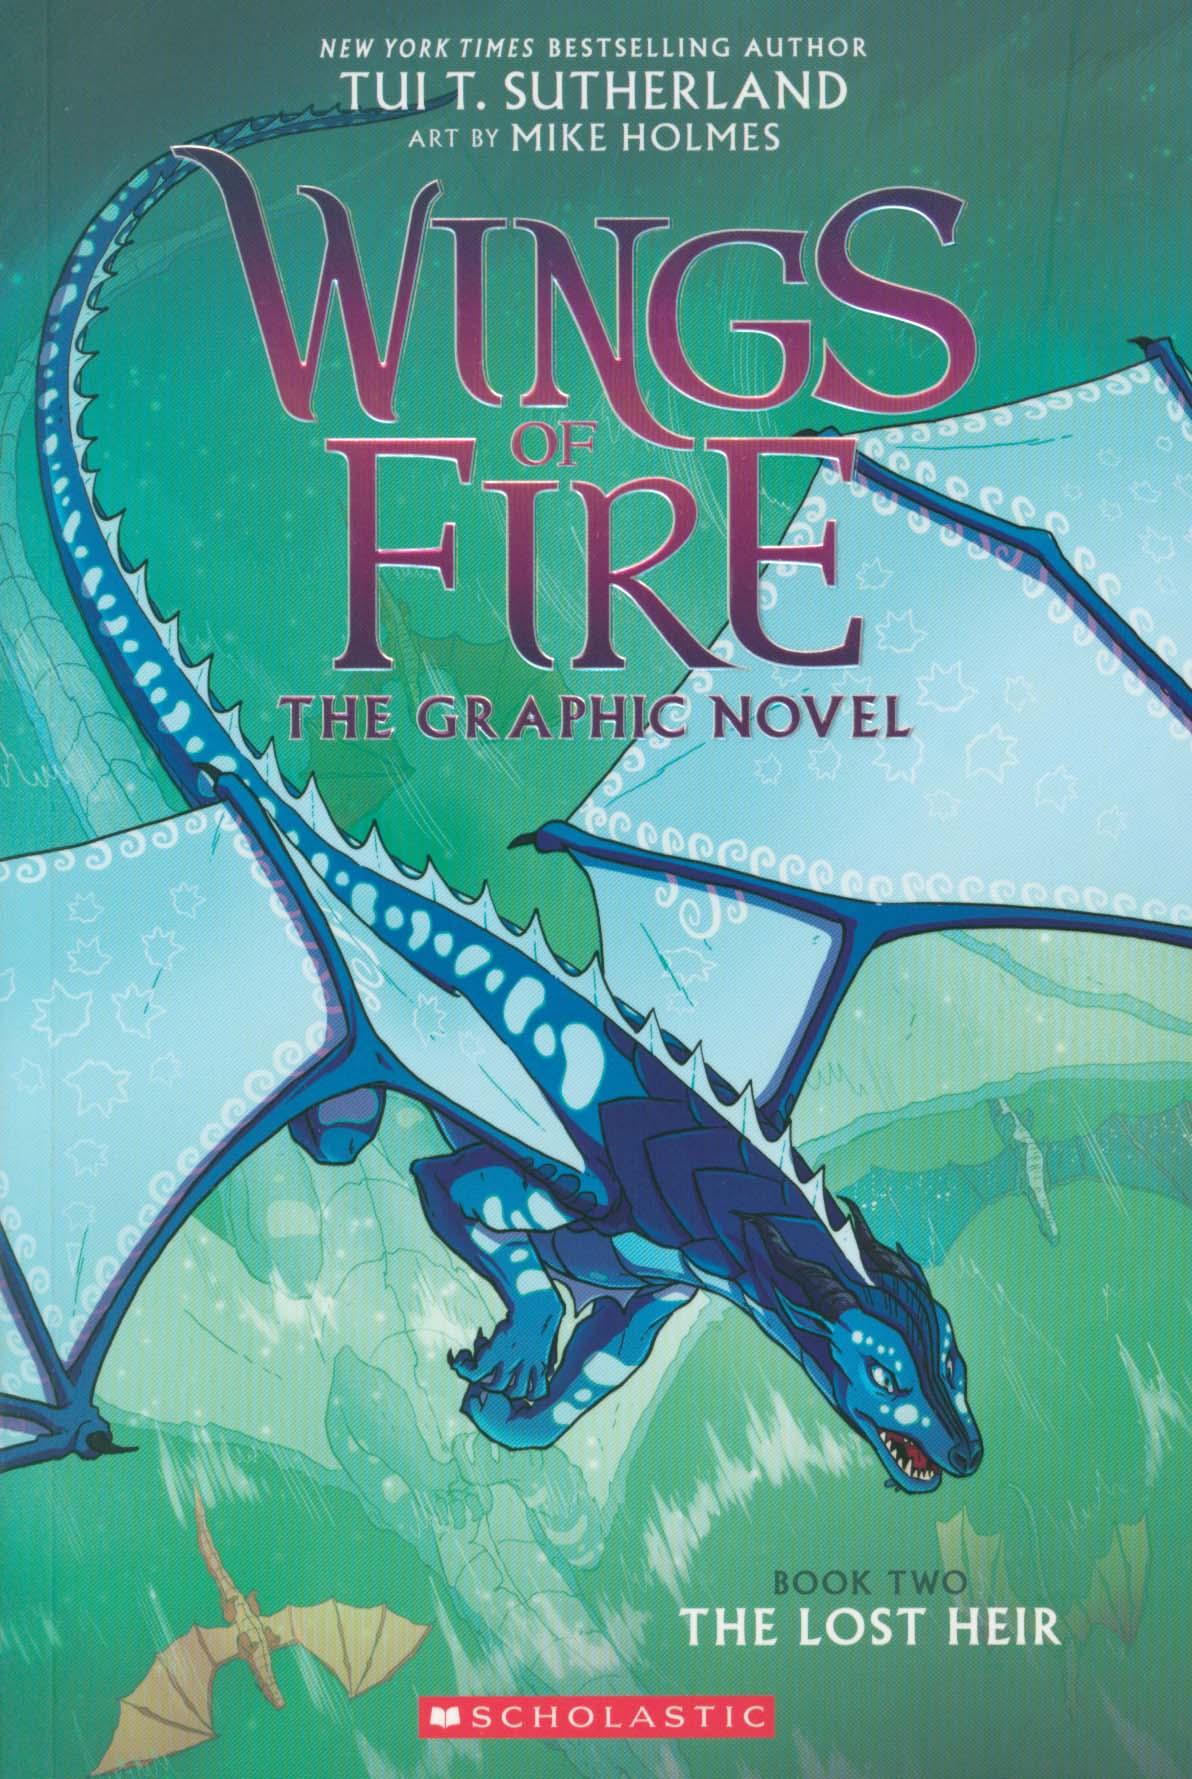 Lost Heir (Wings of Fire Graphic Novel #2) - Tui T Sutherland